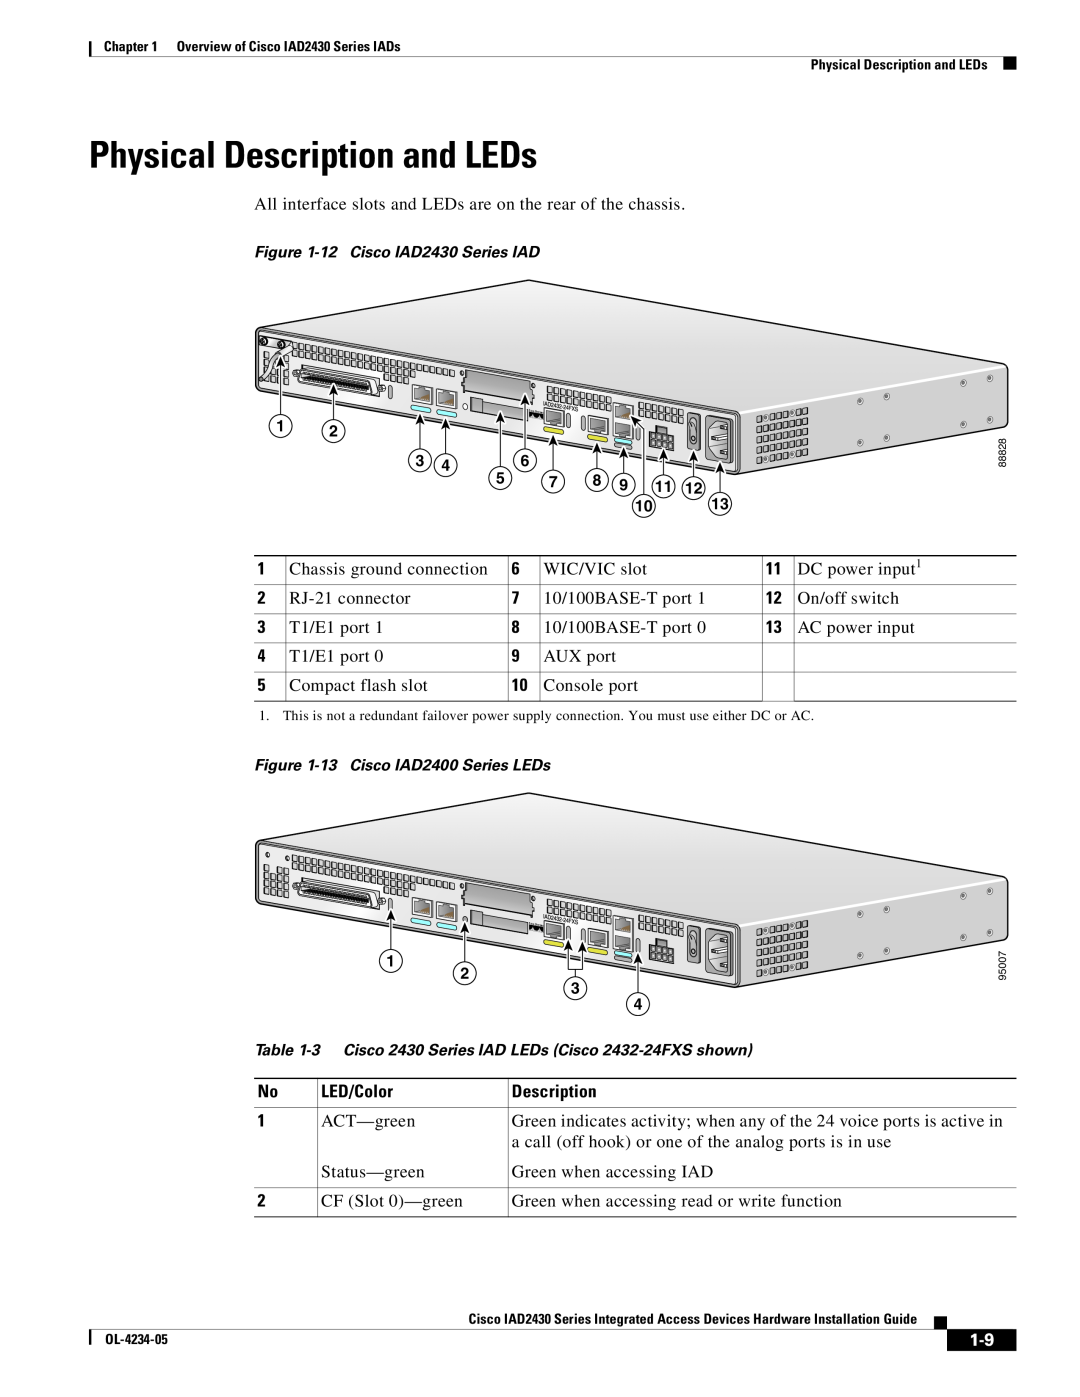 Cisco Systems IAD2430 Series specifications Physical Description and LEDs, LED/Color 